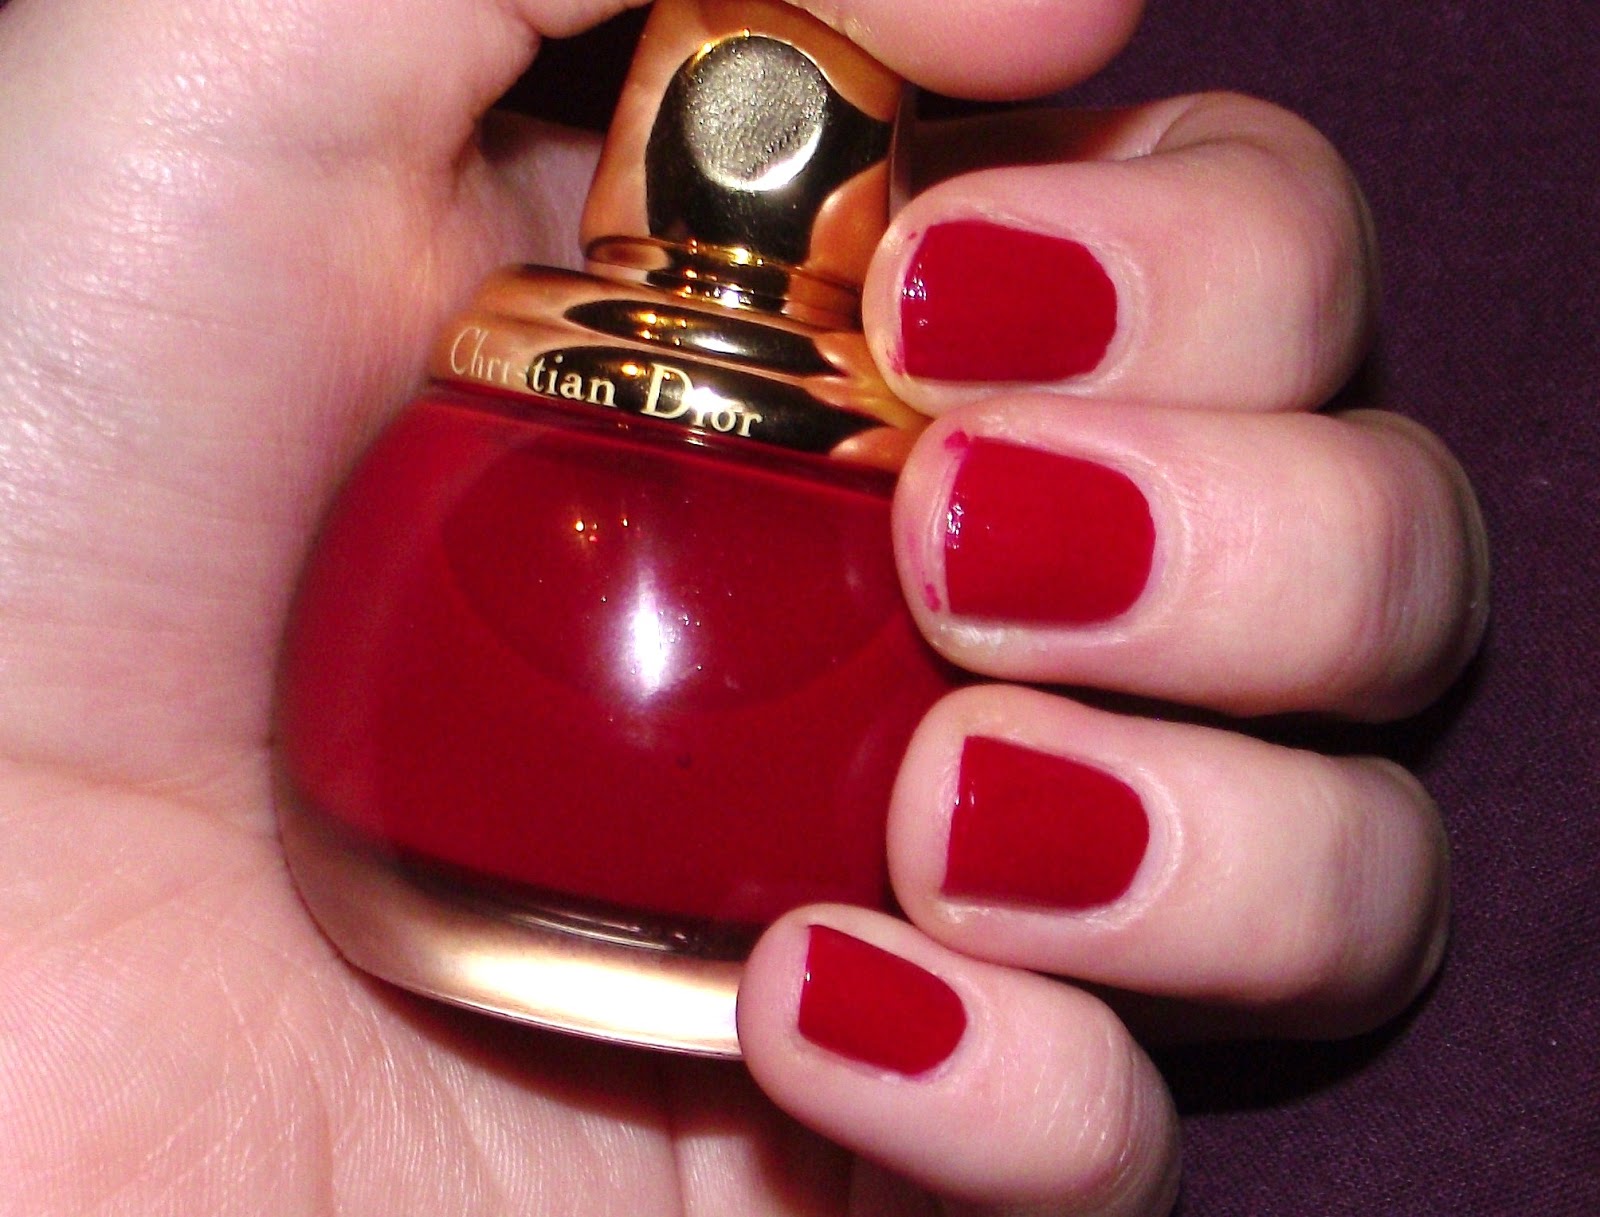 1. Dior Vernis Nail Polish in "Lucky" - wide 1